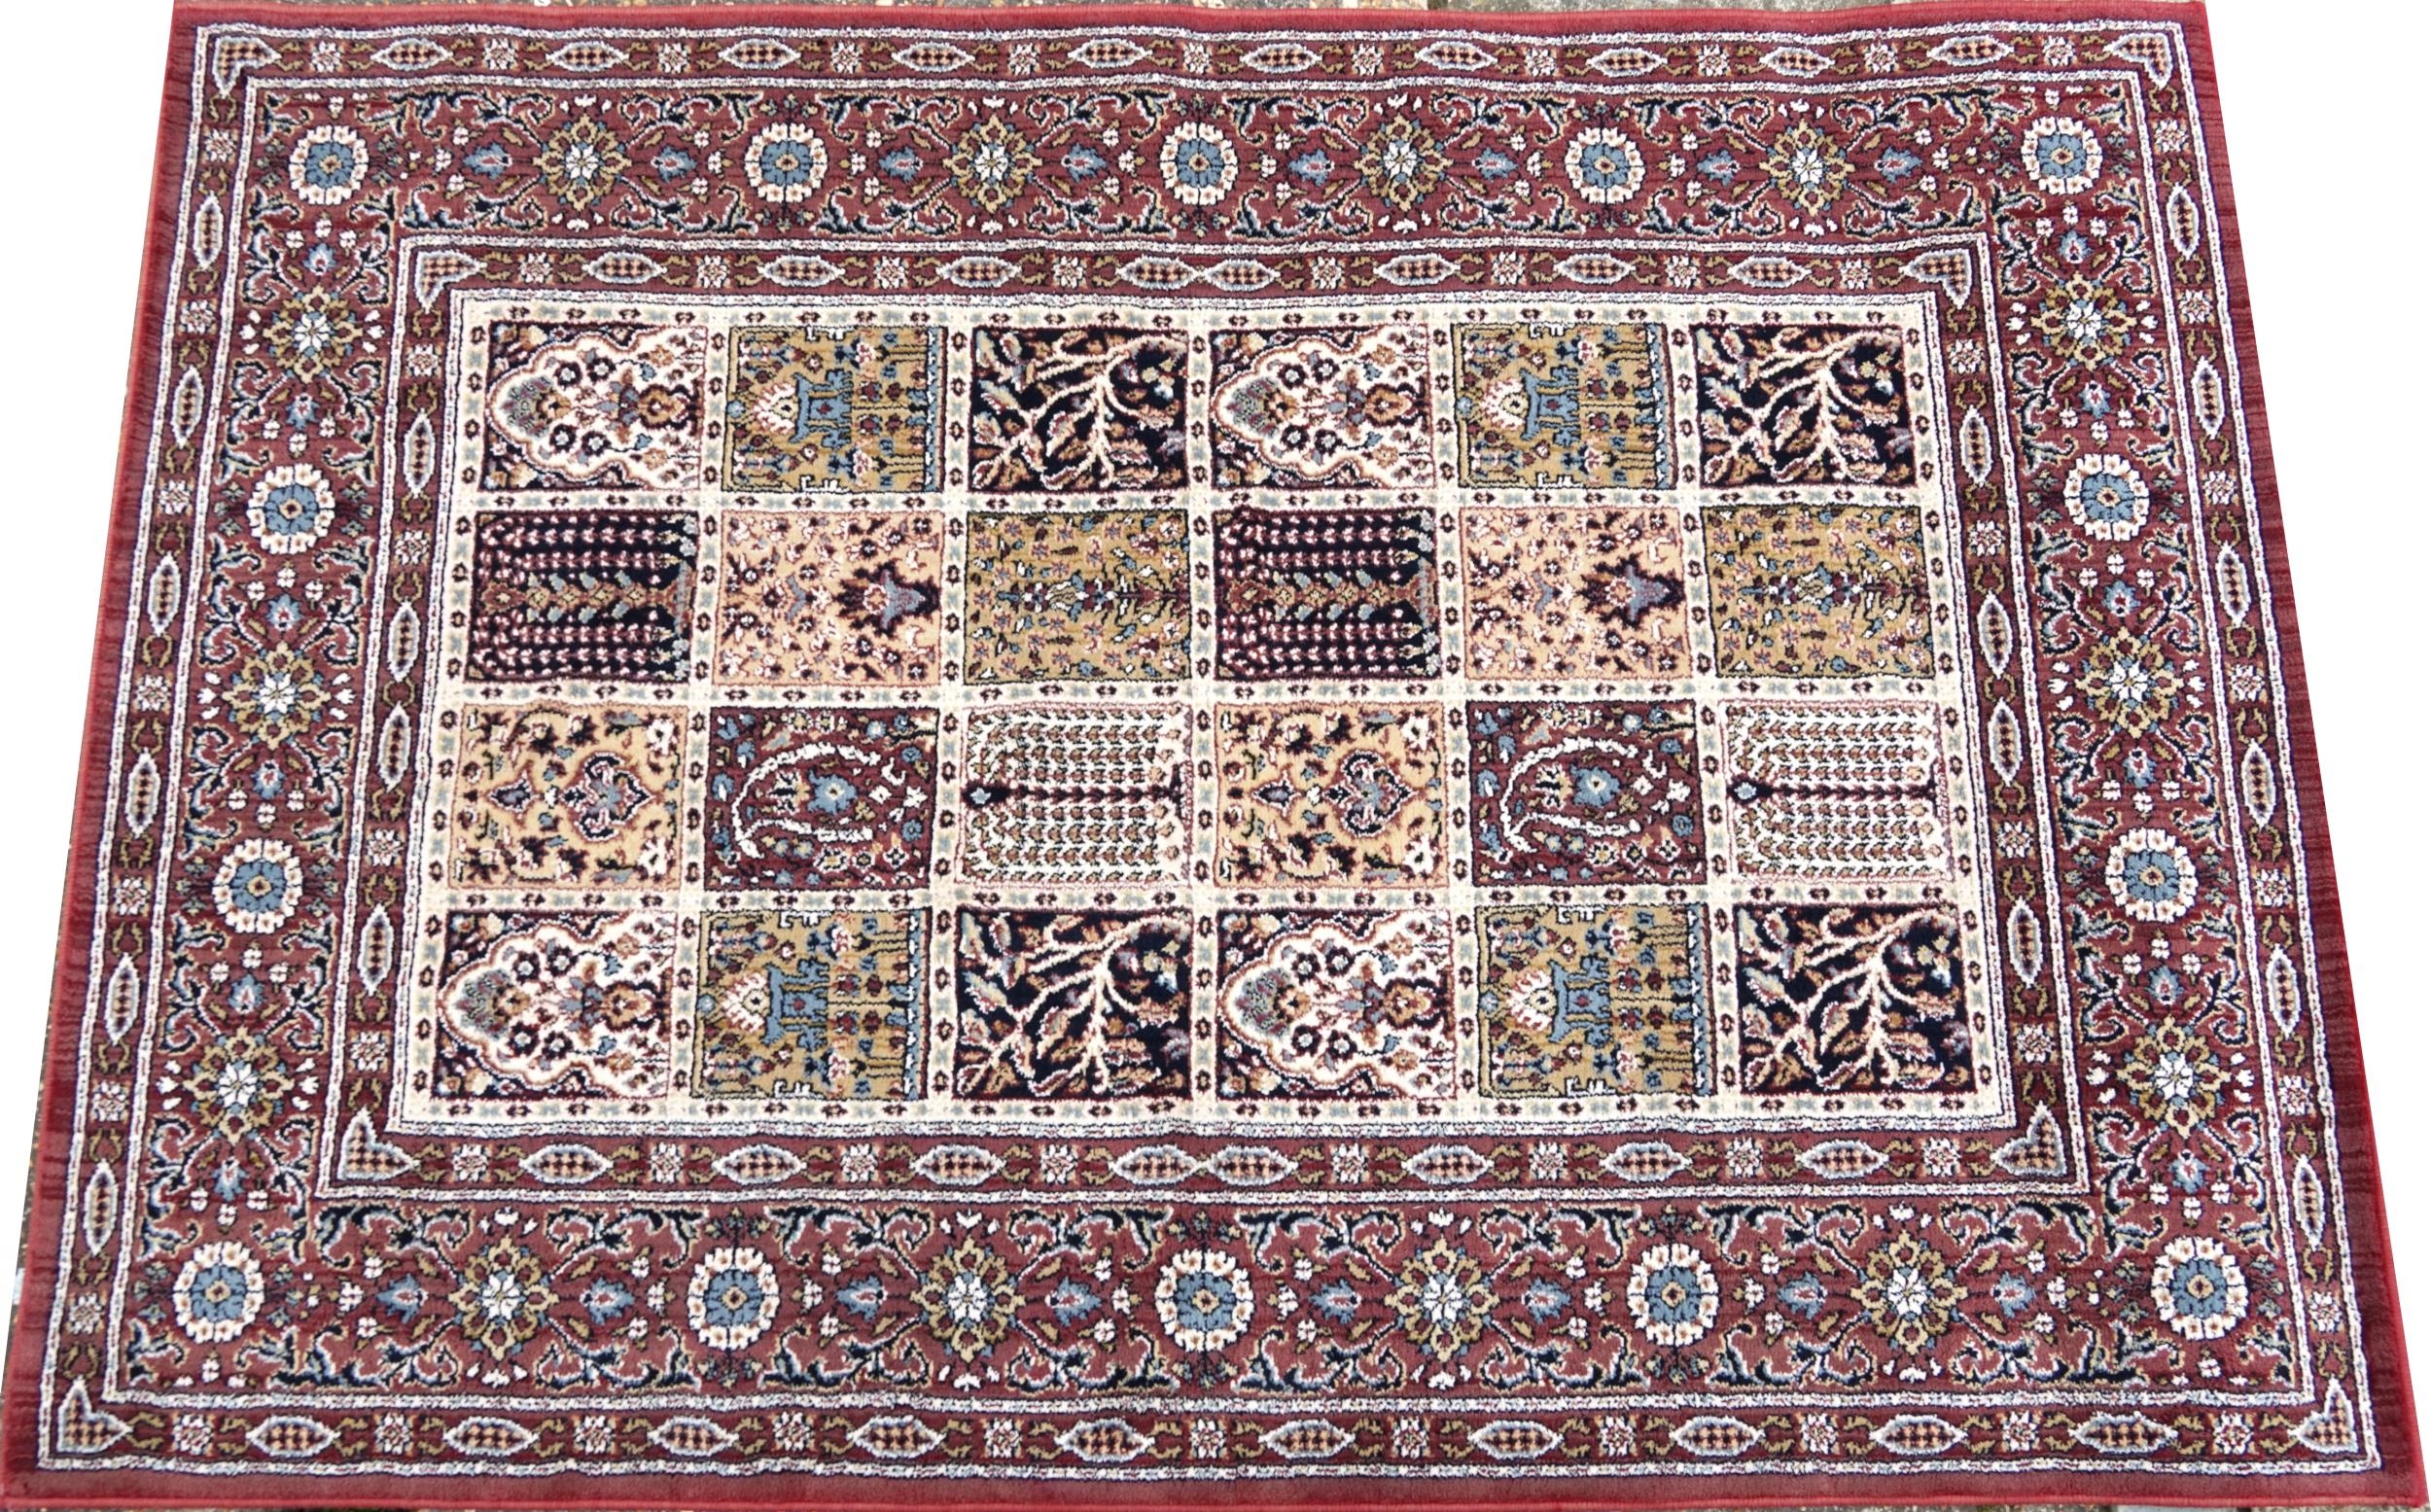 Pair of rectangular Persian style Valby Ruta rugs, each 195cm x 133cm - Image 2 of 13